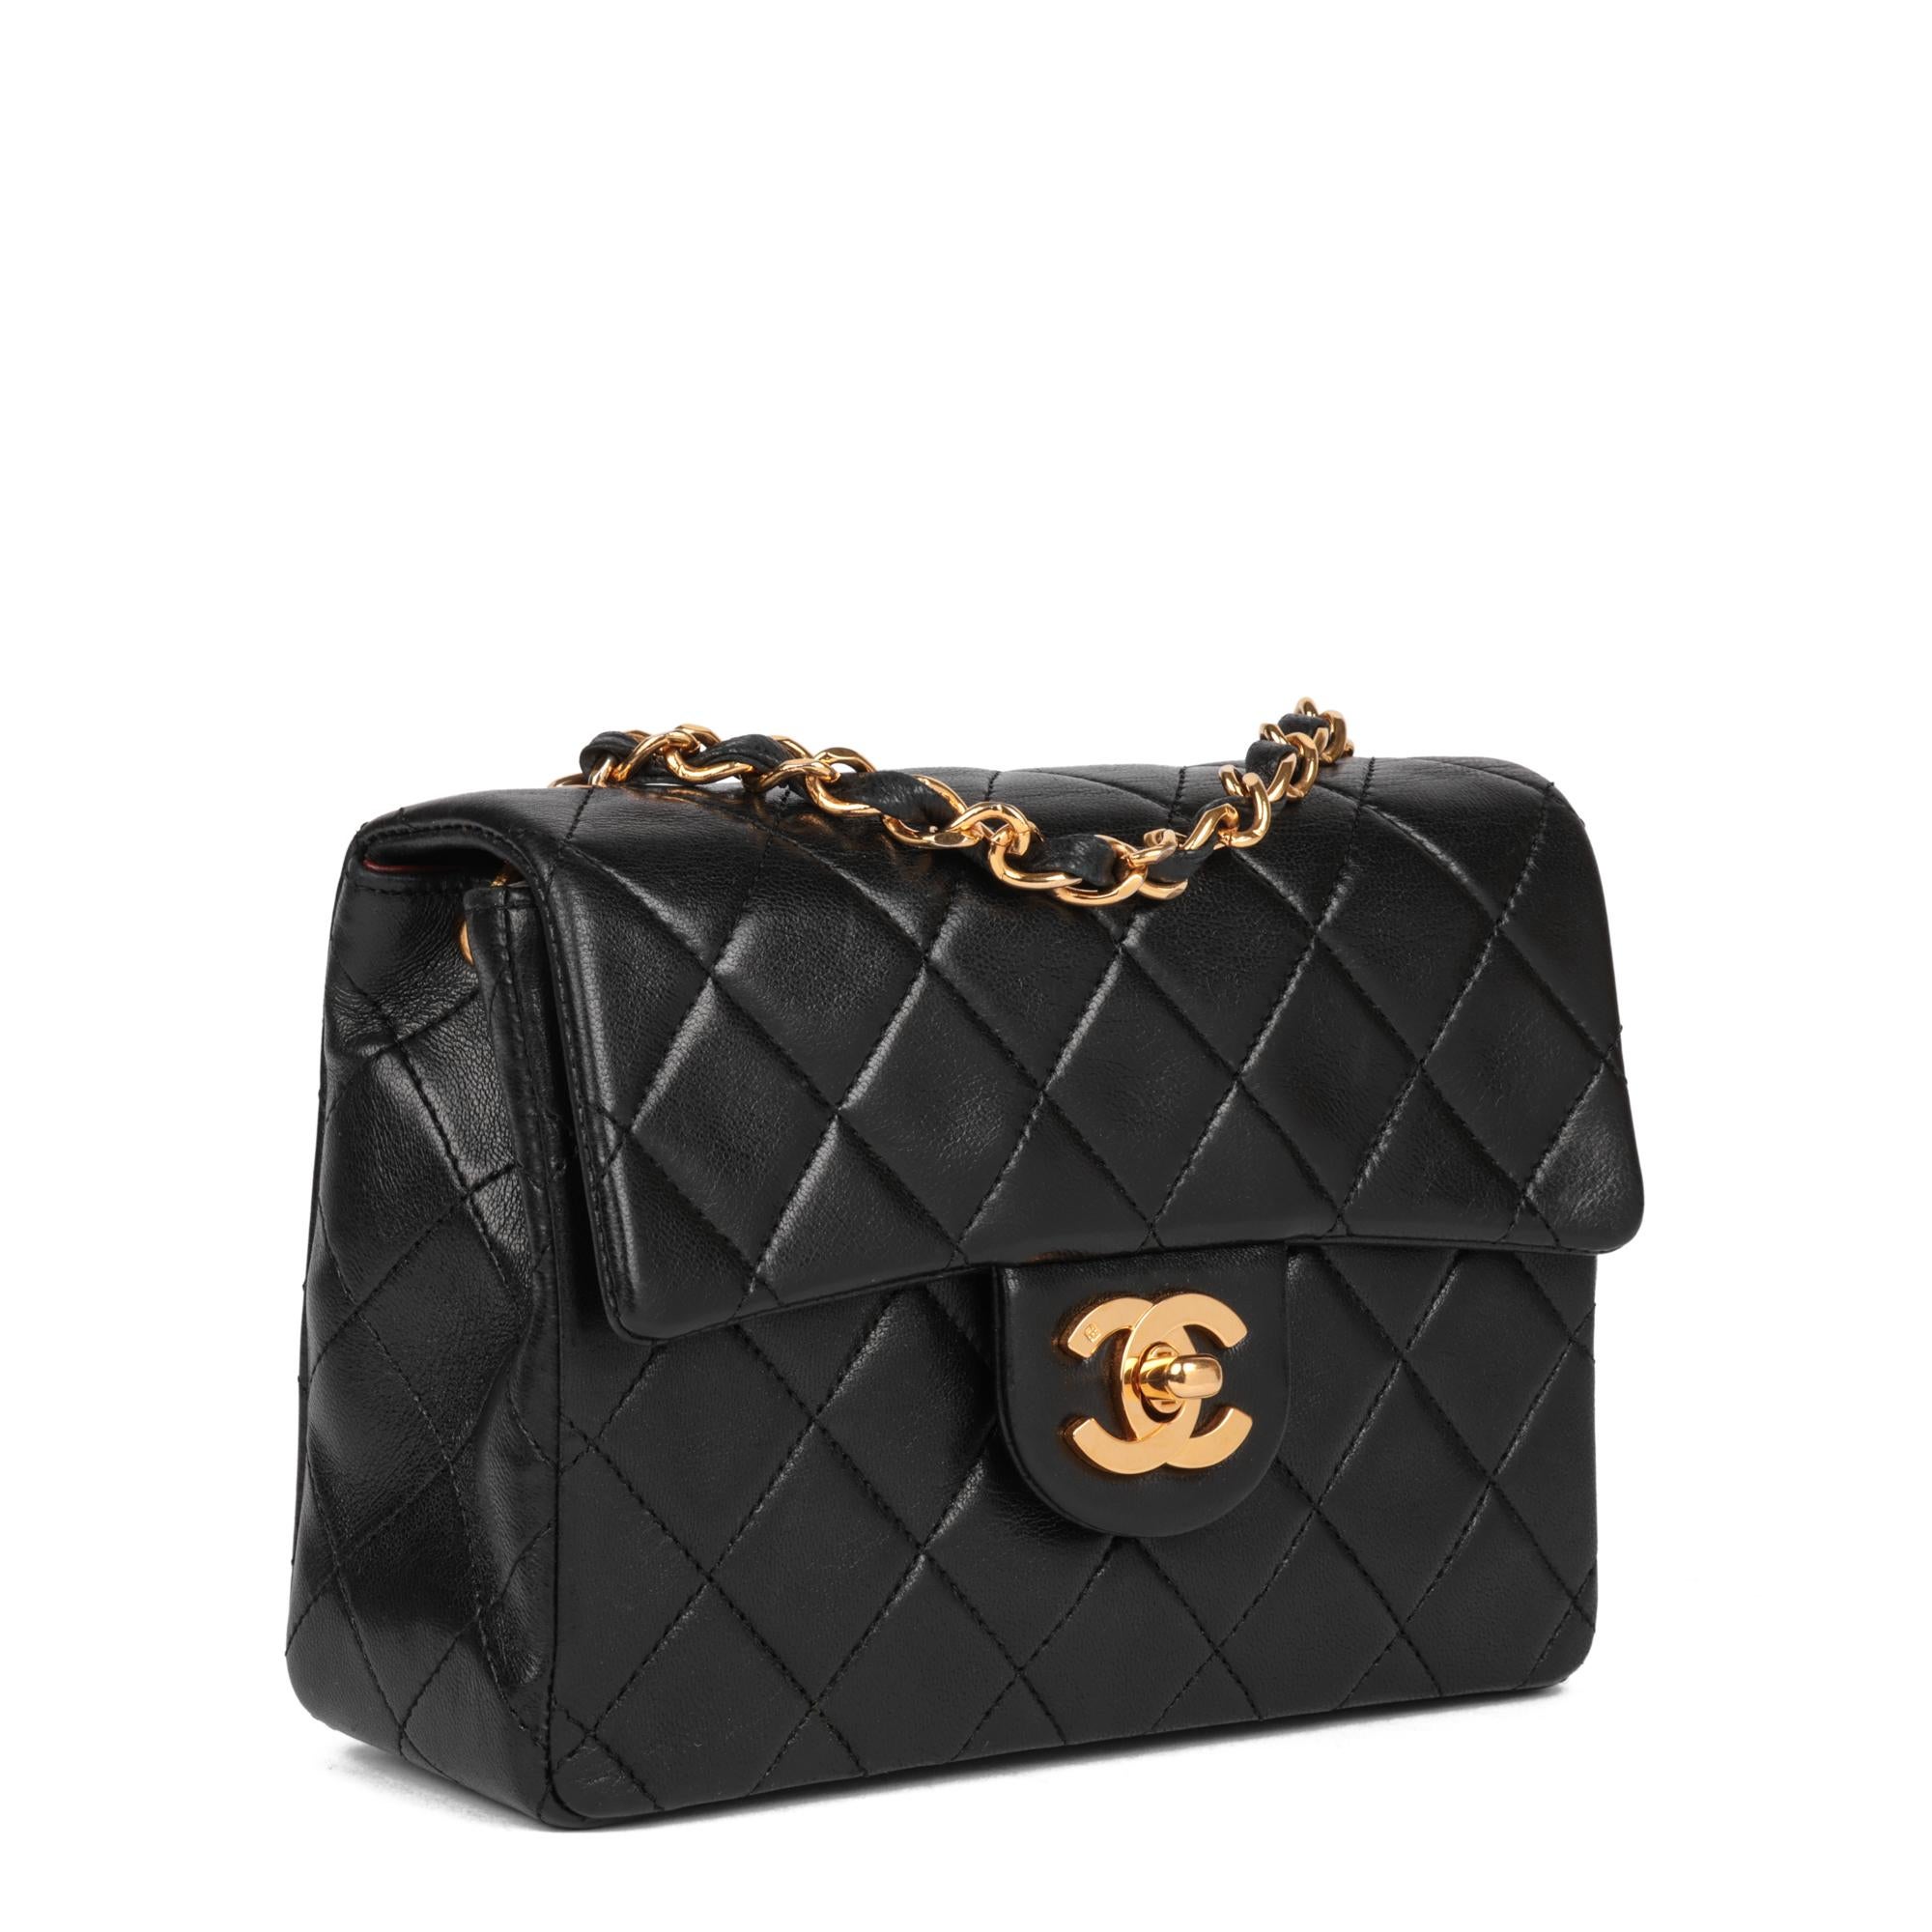 CHANEL
Black Quilted Lambskin Vintage Square Mini Flap Bag

Xupes Reference: HB5230
Serial Number: 1456178
Age (Circa): 1990
Accompanied By: Chanel Dust Bag, Authenticity Card
Authenticity Details: Authenticity Card, Serial Sticker (Made in